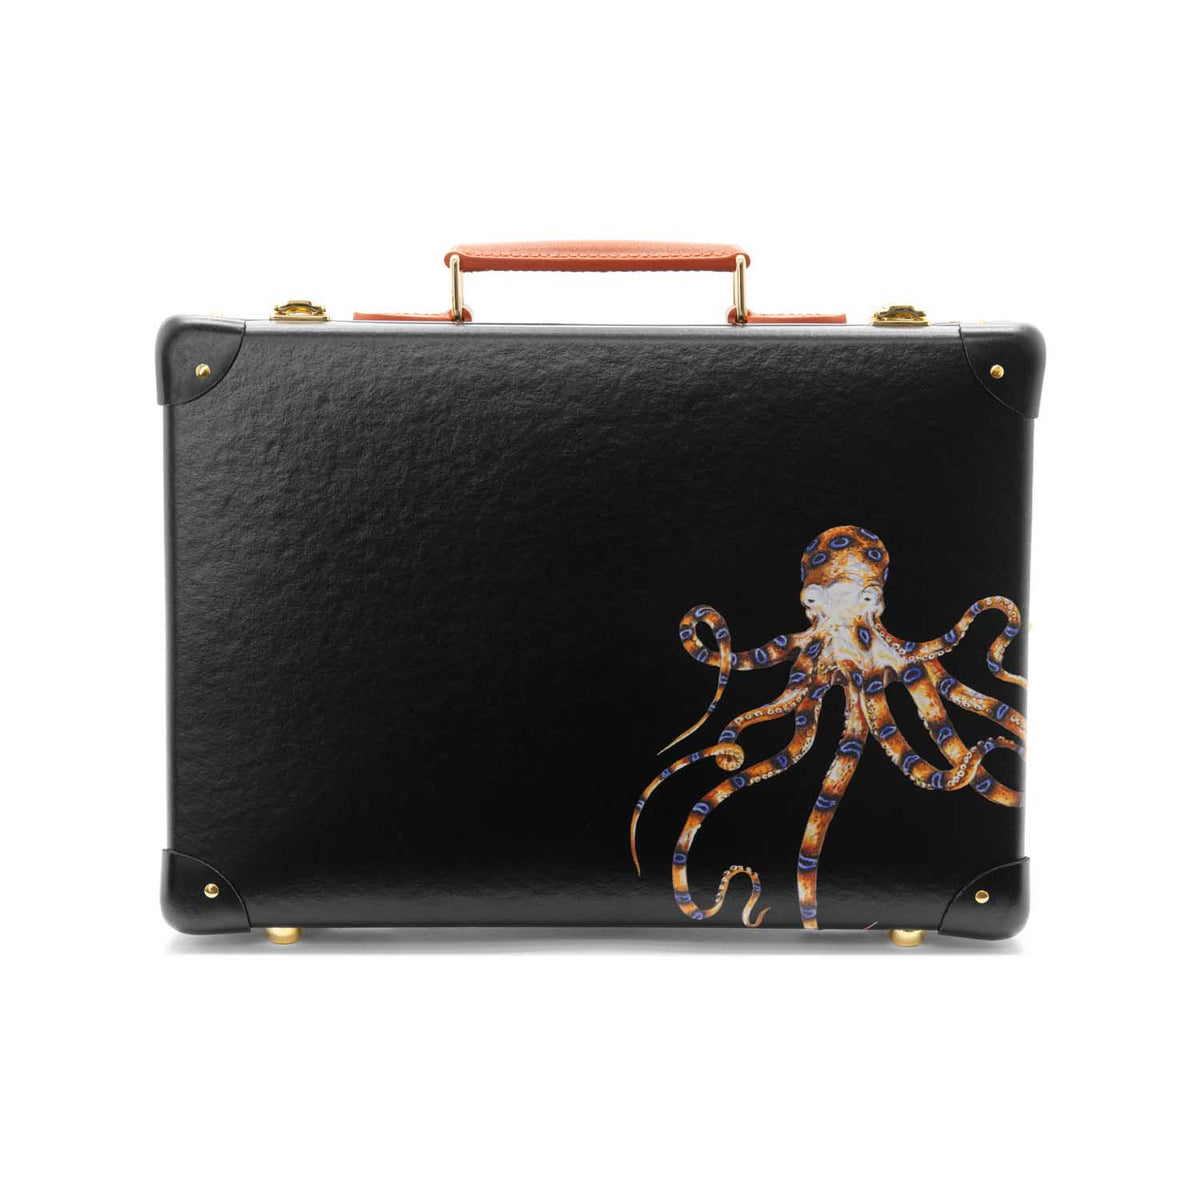 James Bond Small Attaché Case - Octopussy Edition - By Globe-Trotter